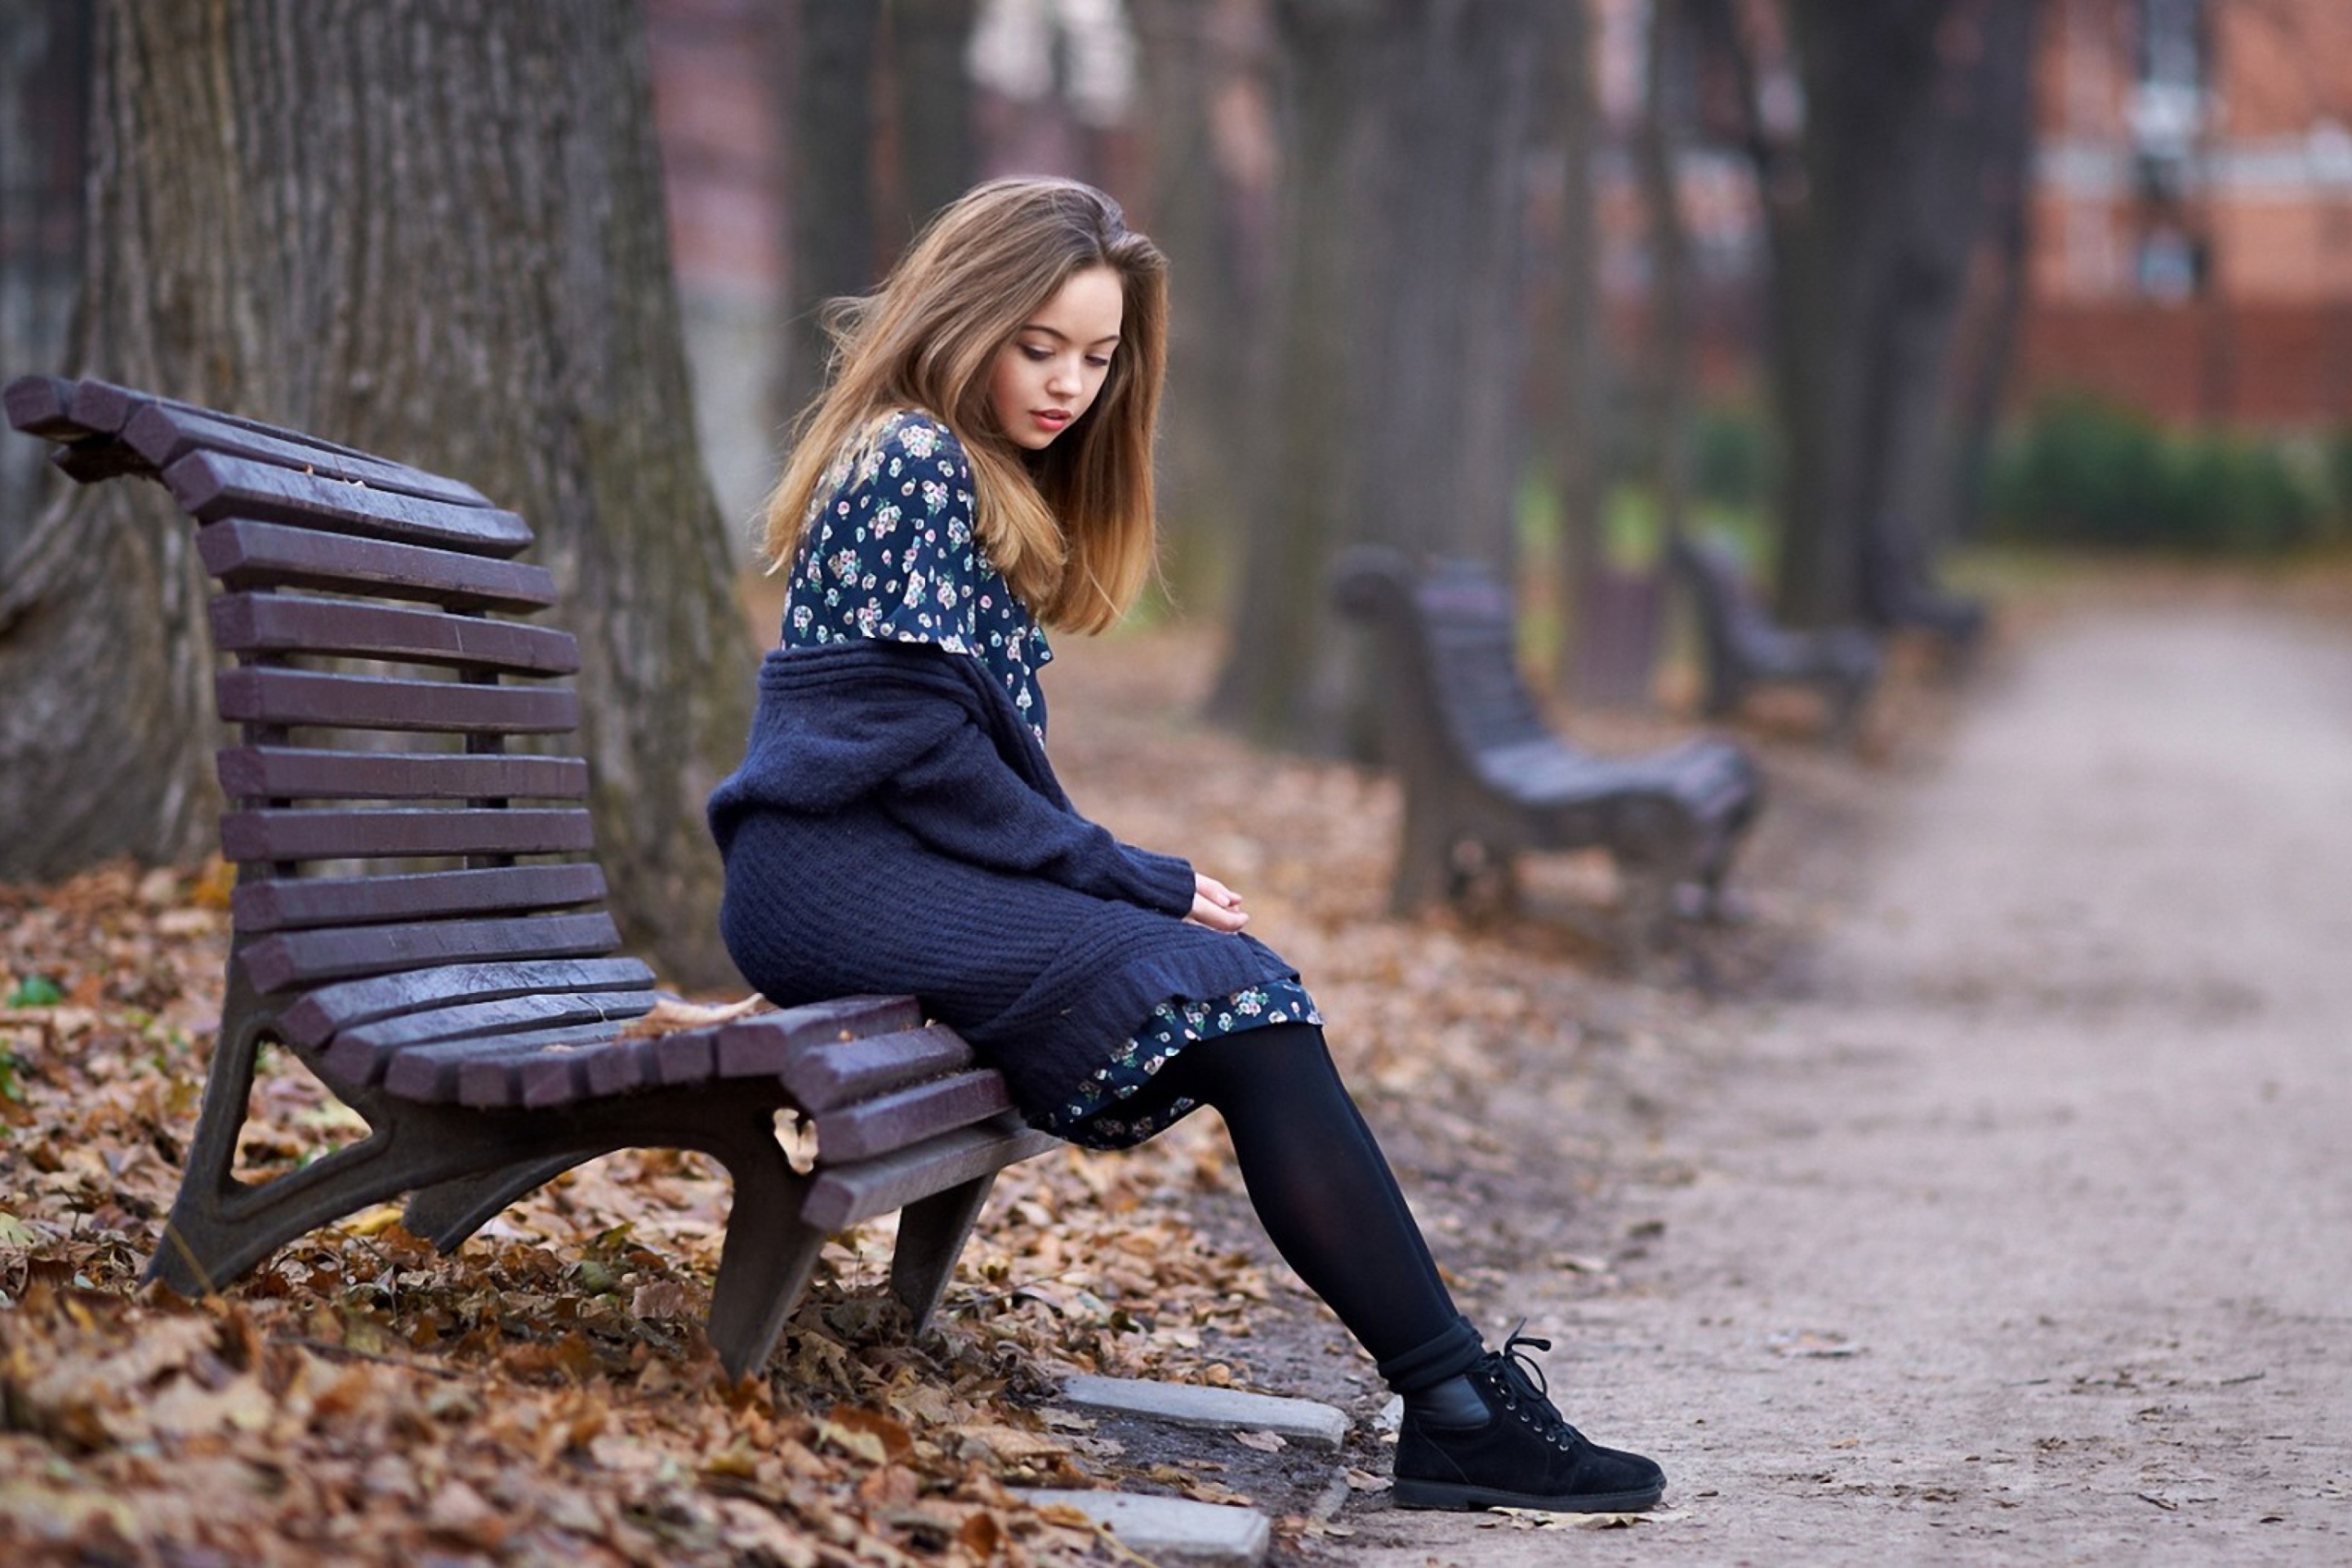 Beautiful Girl Sitting On Bench In Autumn Park wallpaper 2880x1920